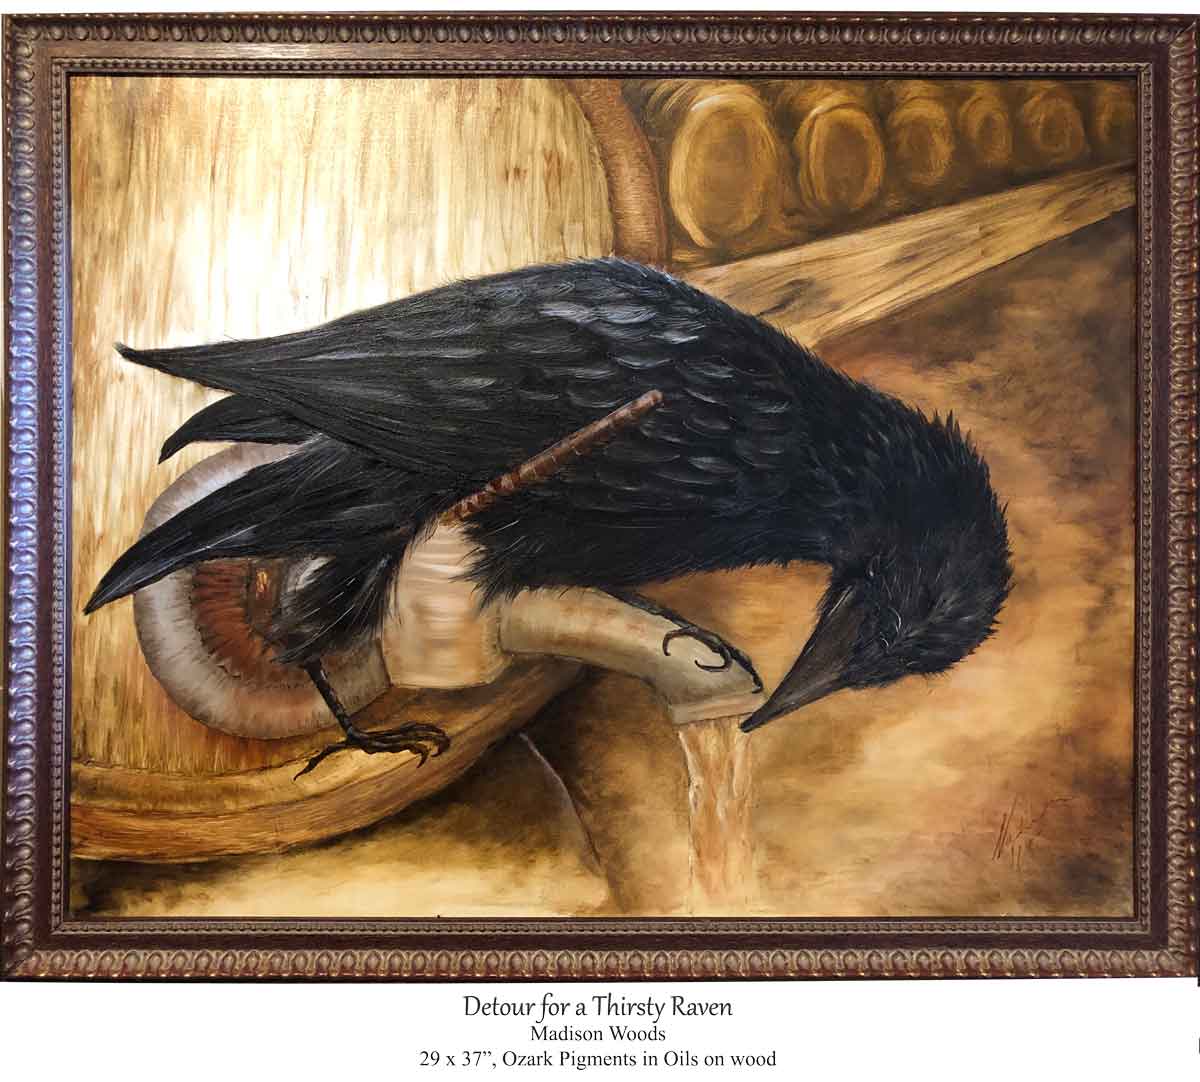 My raven painting in a repurposed frame of excellent quality.